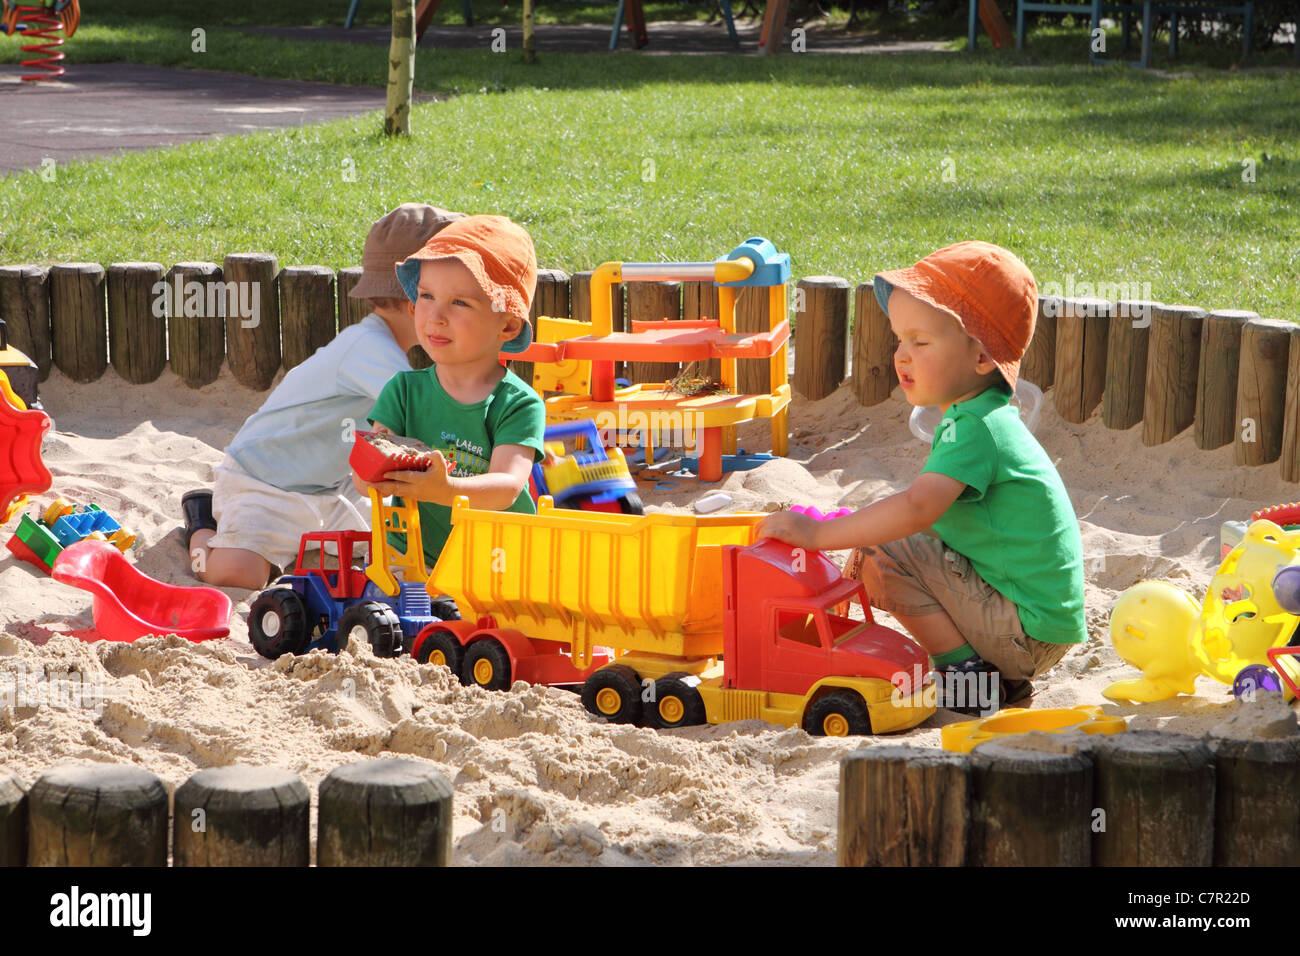 sand pit for toddlers